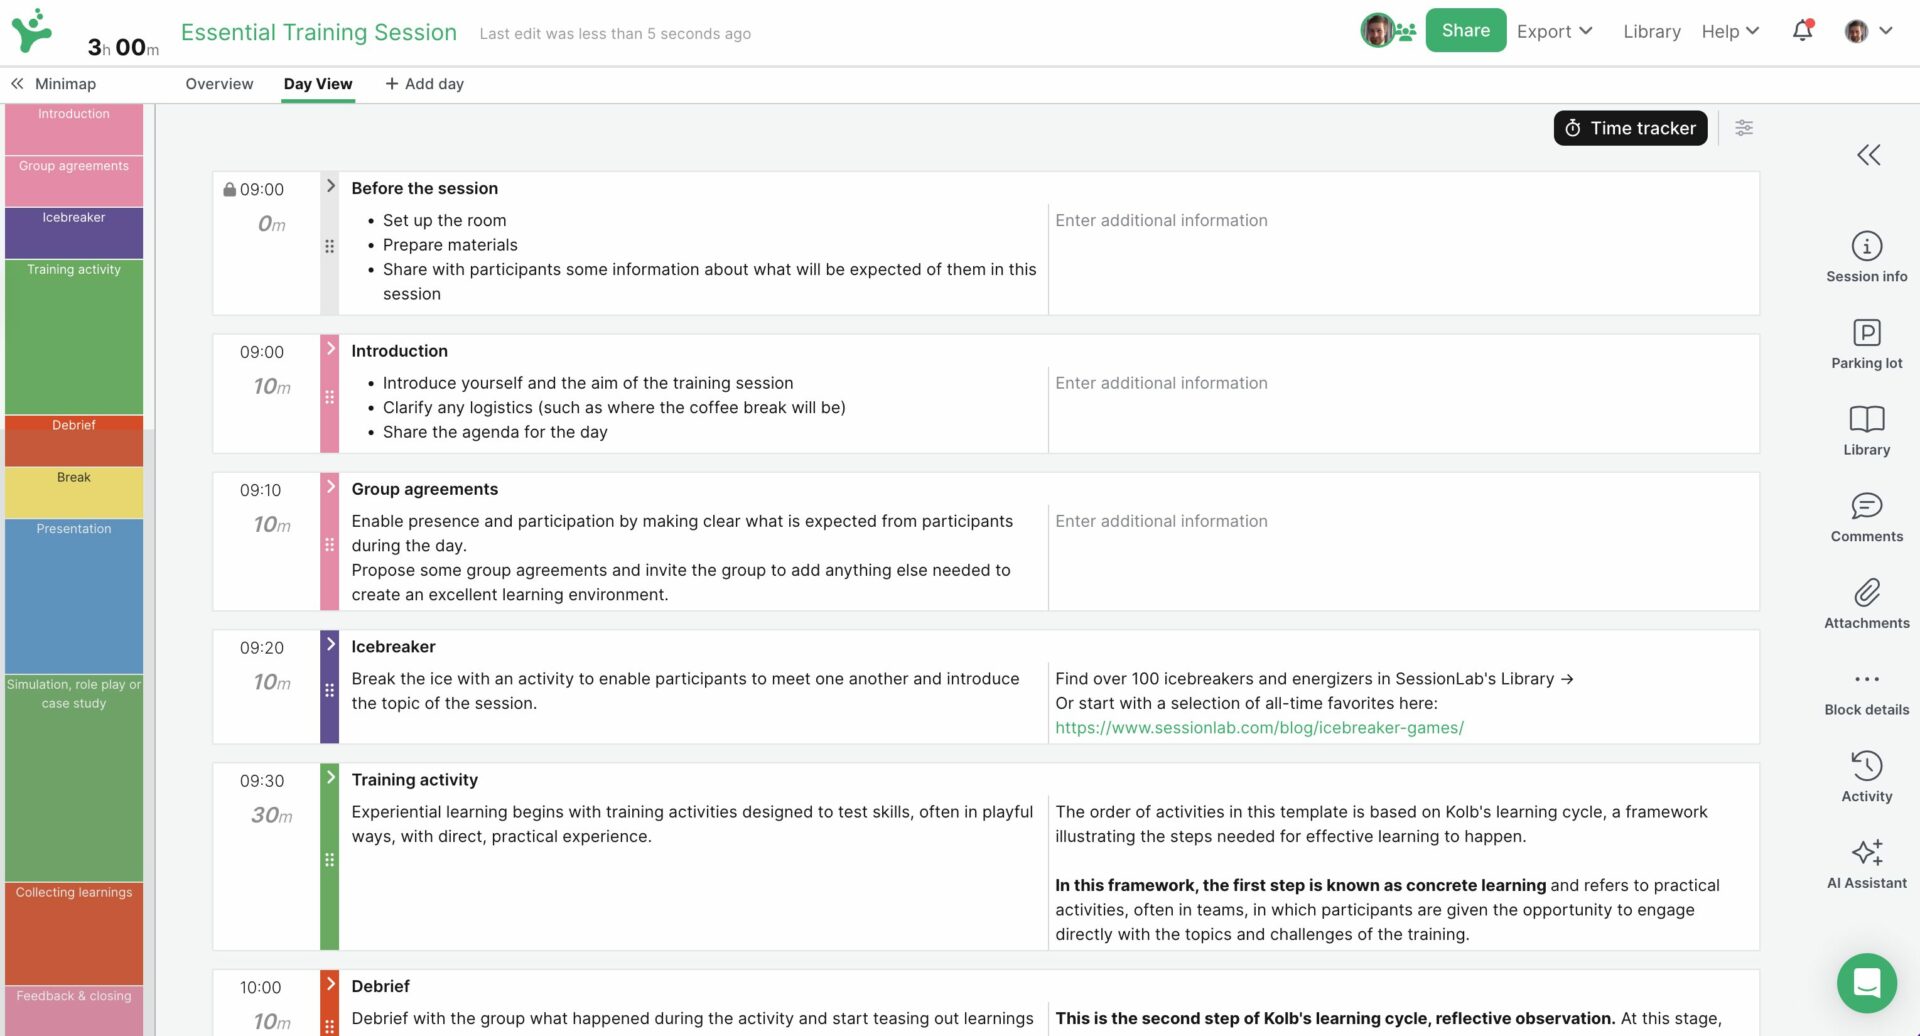 A screenshot of a training session agenda created in SessionLab.